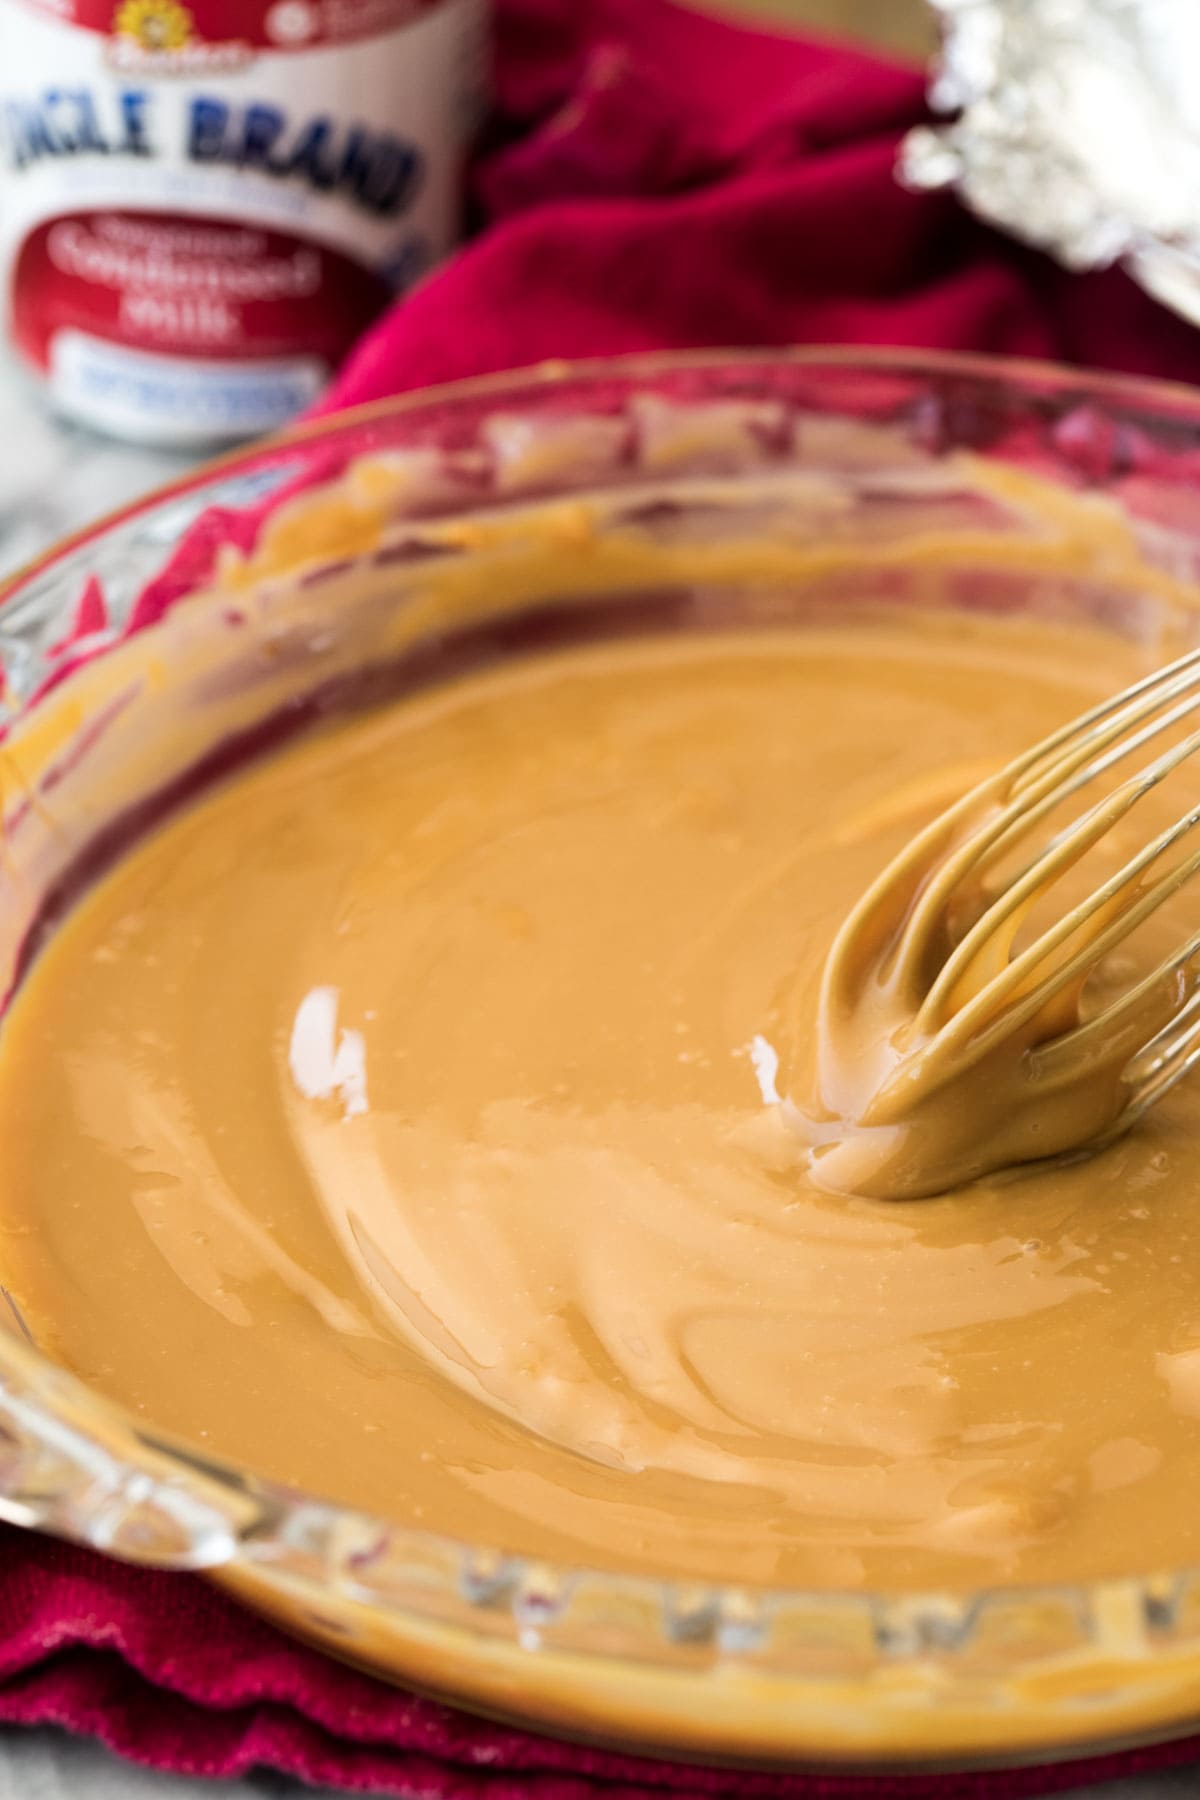 Dulce de leche in pie plate with whisk